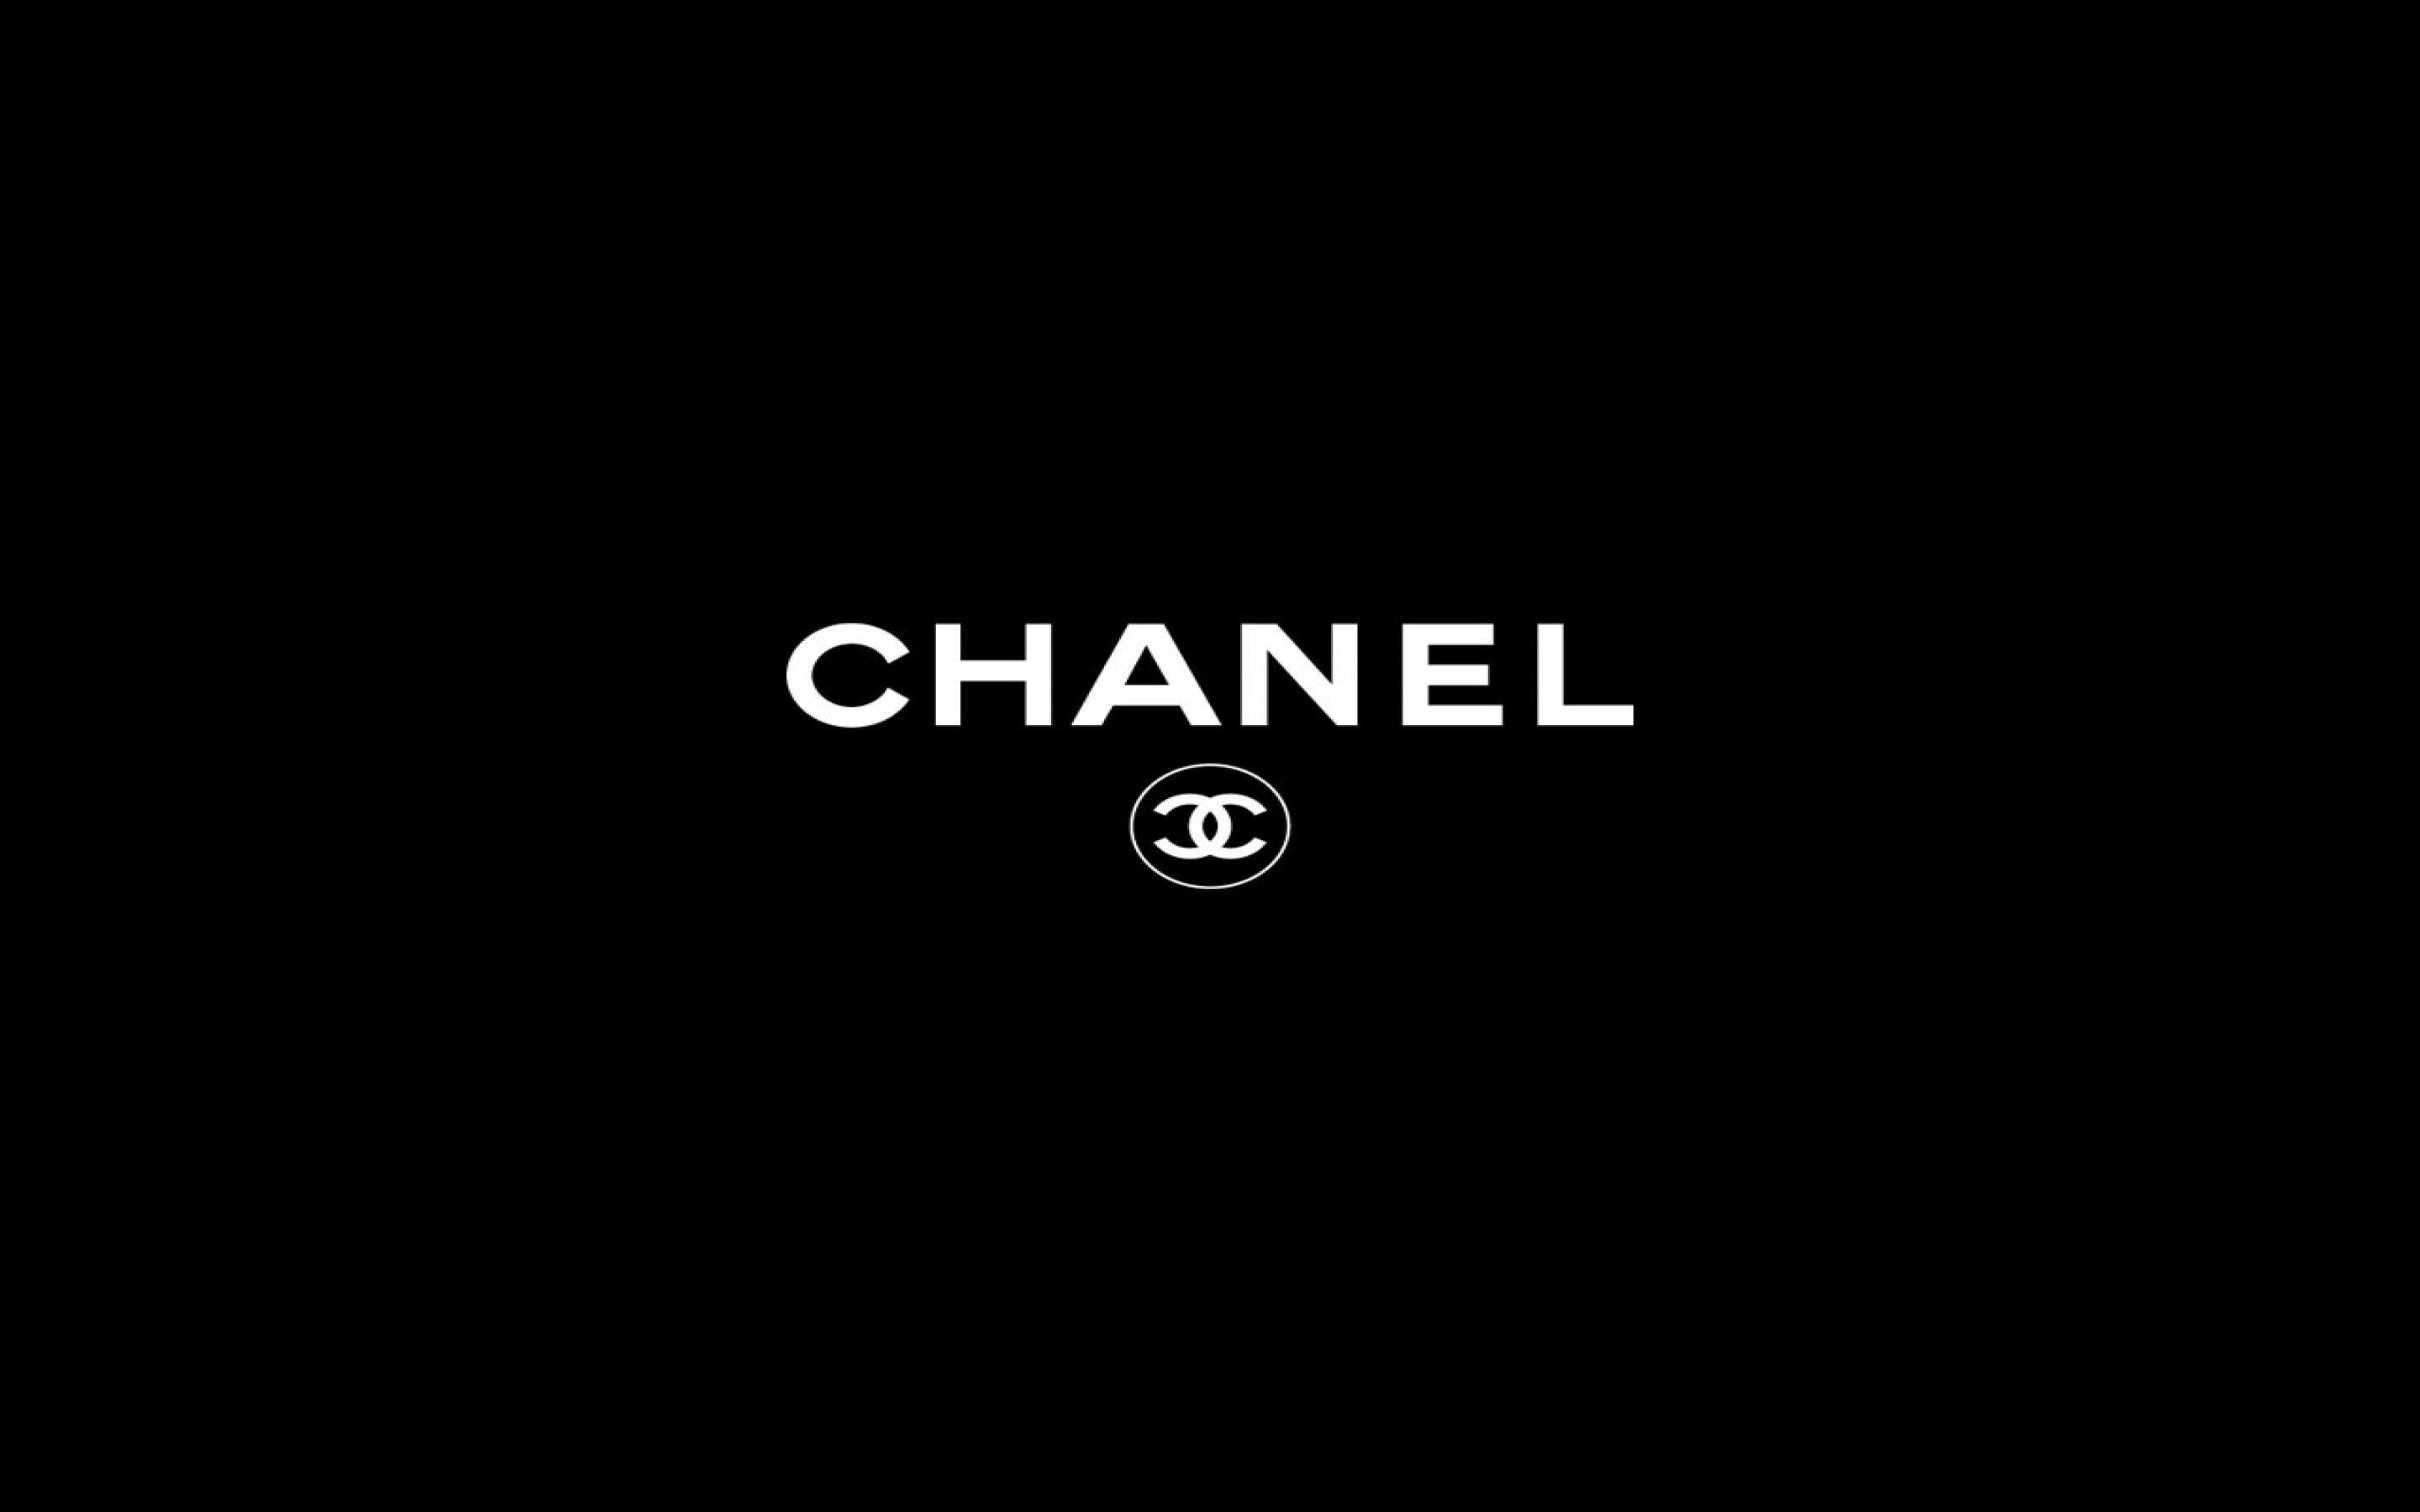 Chanel wallpaper for desktop background, laptop, and mobile phone. - Chanel